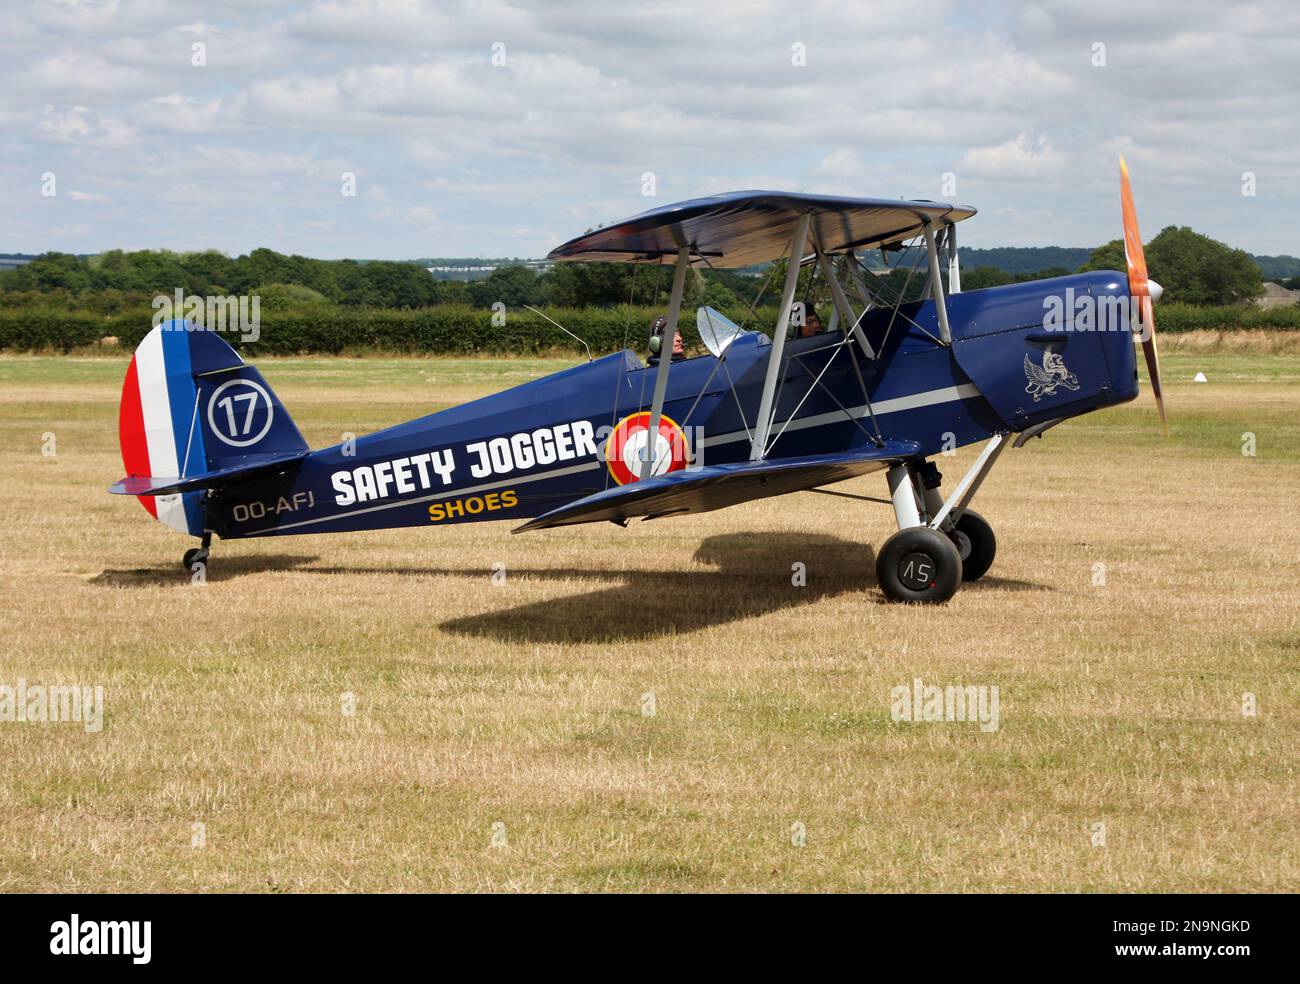 A SNCAN/Stampe SV.4C biplane advertising Safety Jogger shoes at Headcorn airfield Kent England Stock Photo